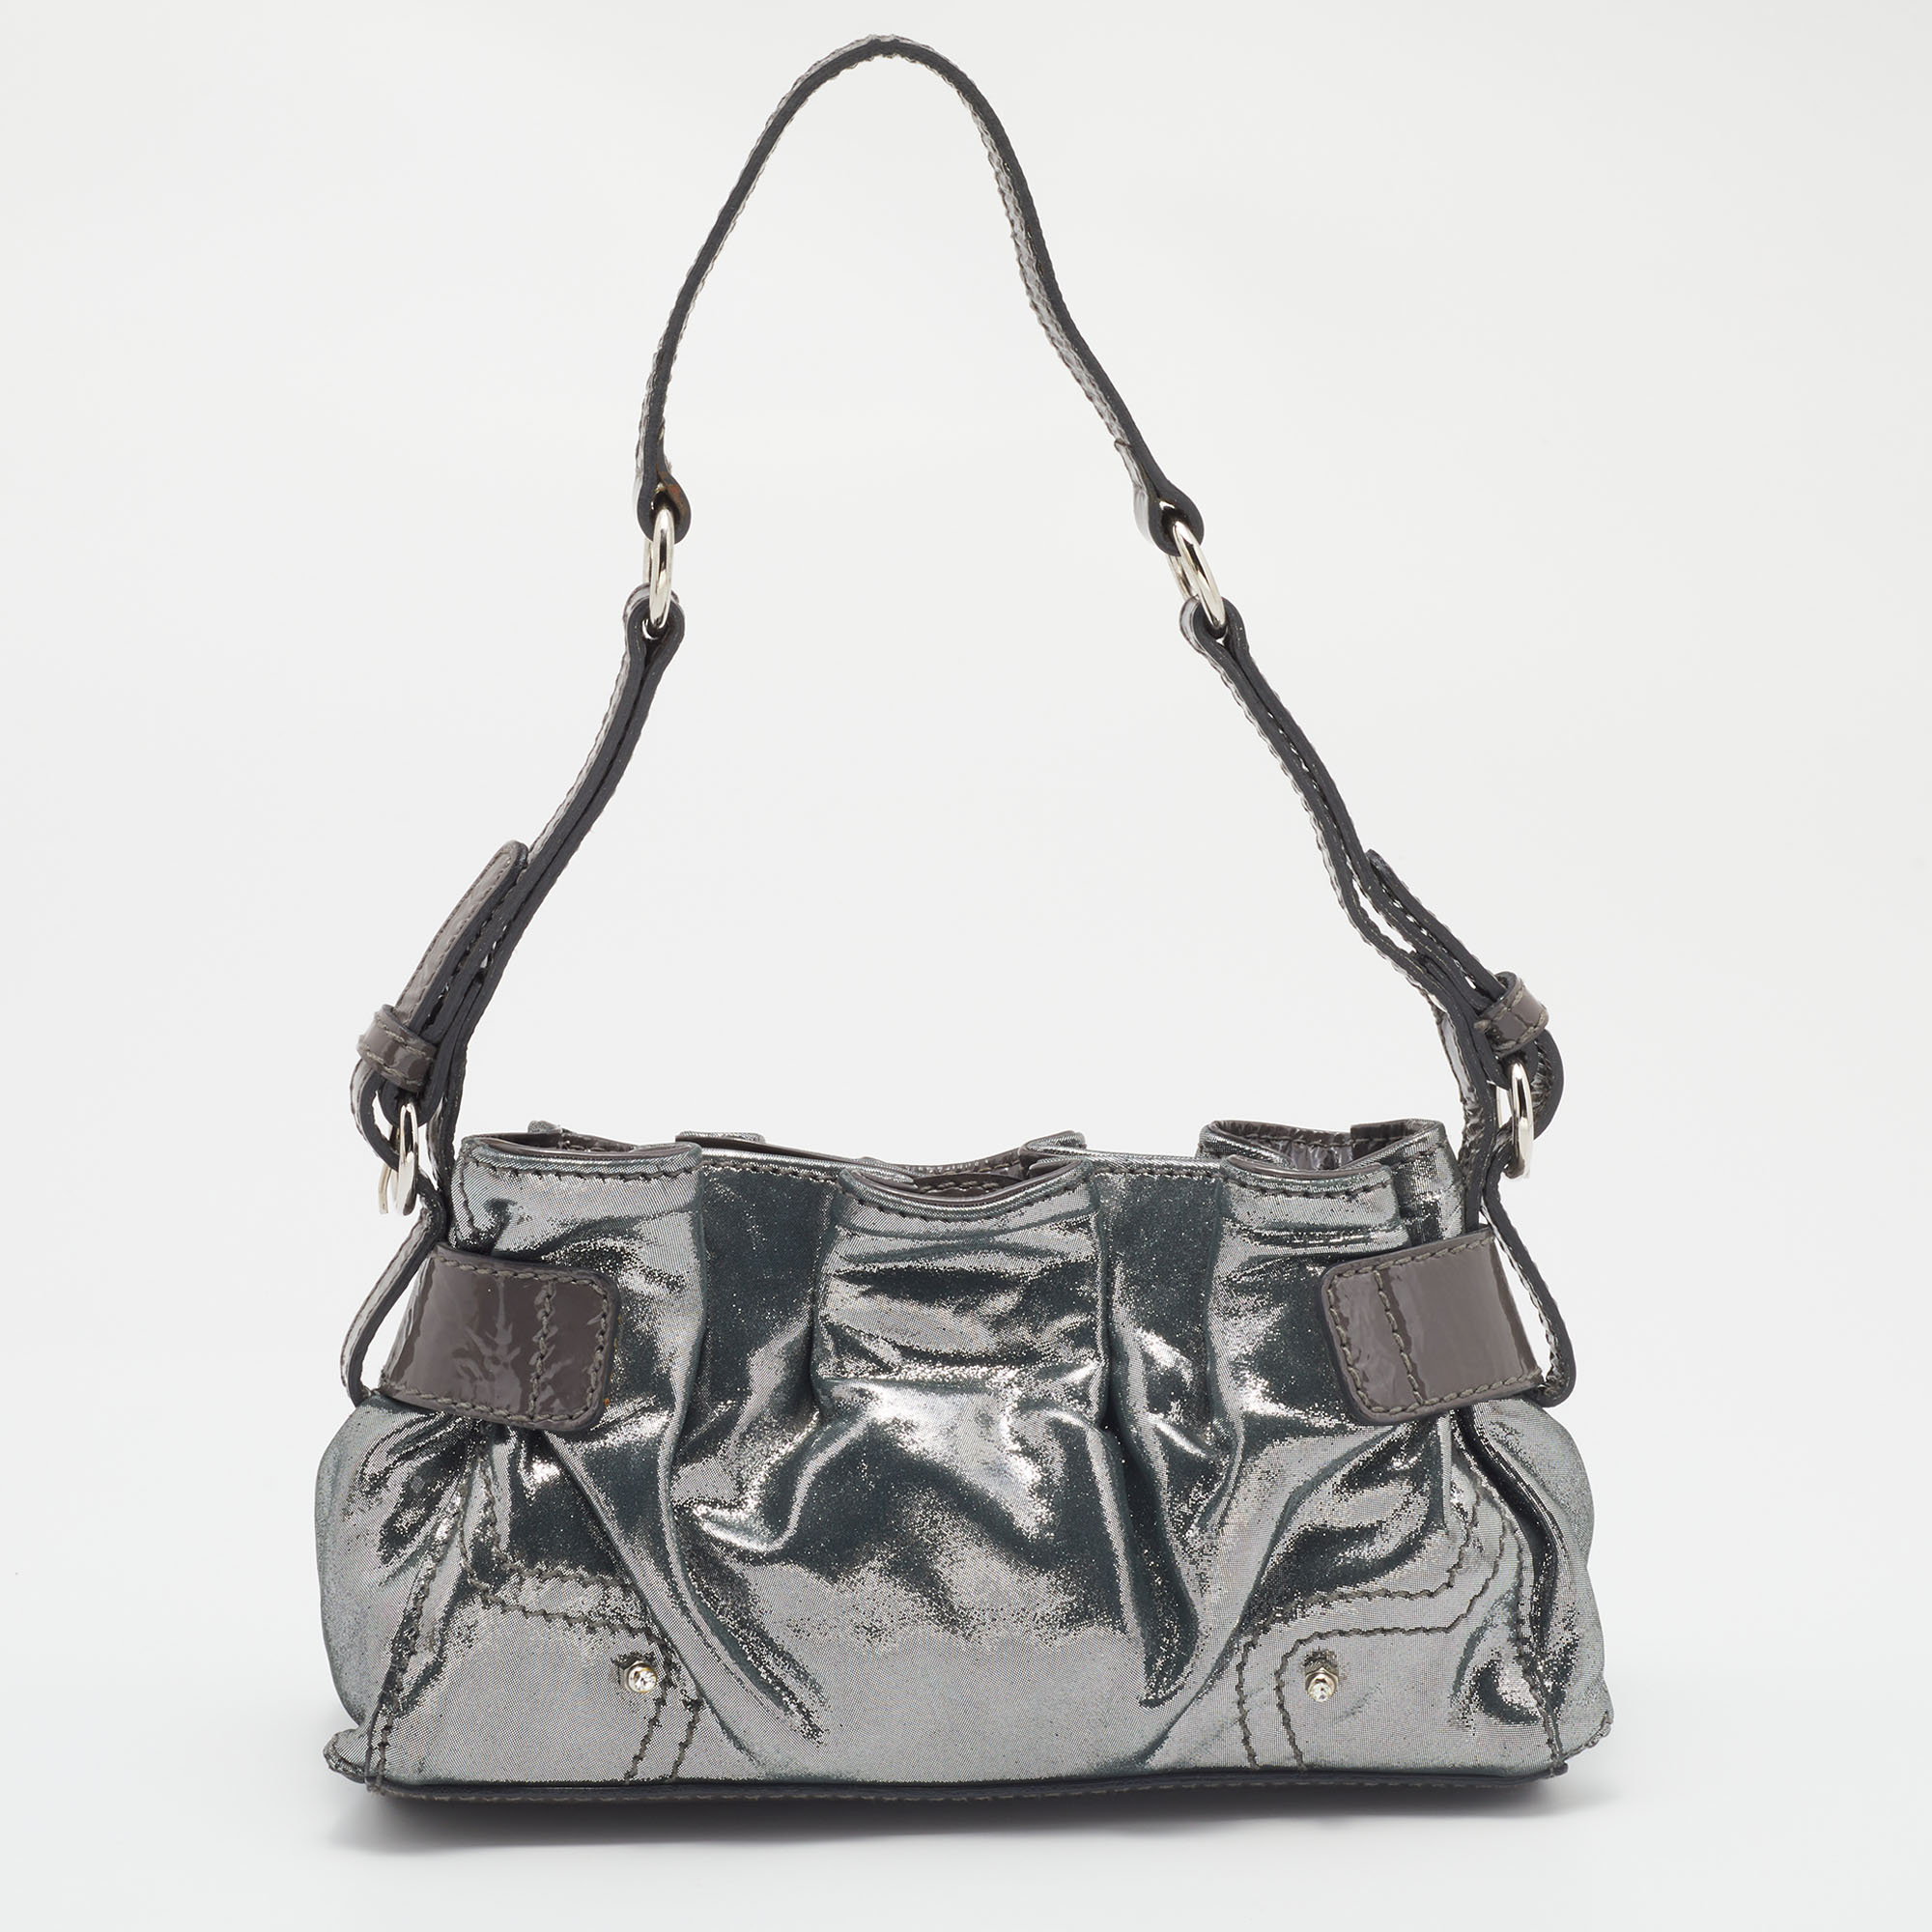 Aigner Metallic Grey Shimmering Patent And Leather Baguette Bag